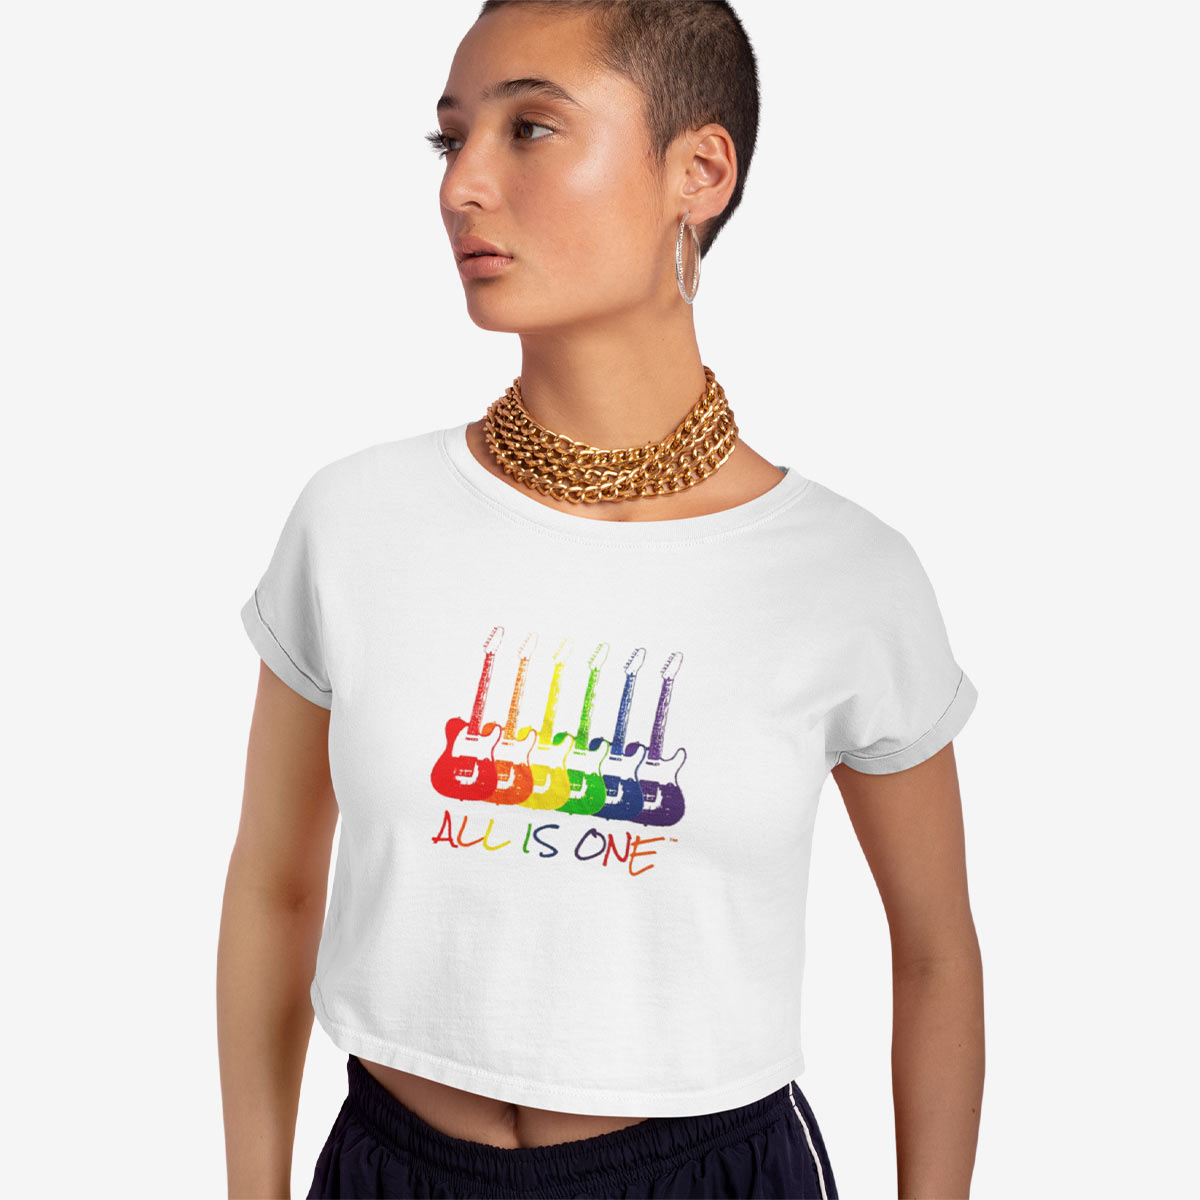 Retro Cropped Top Tee with Rainbow Guitars All Is One Design image number 6